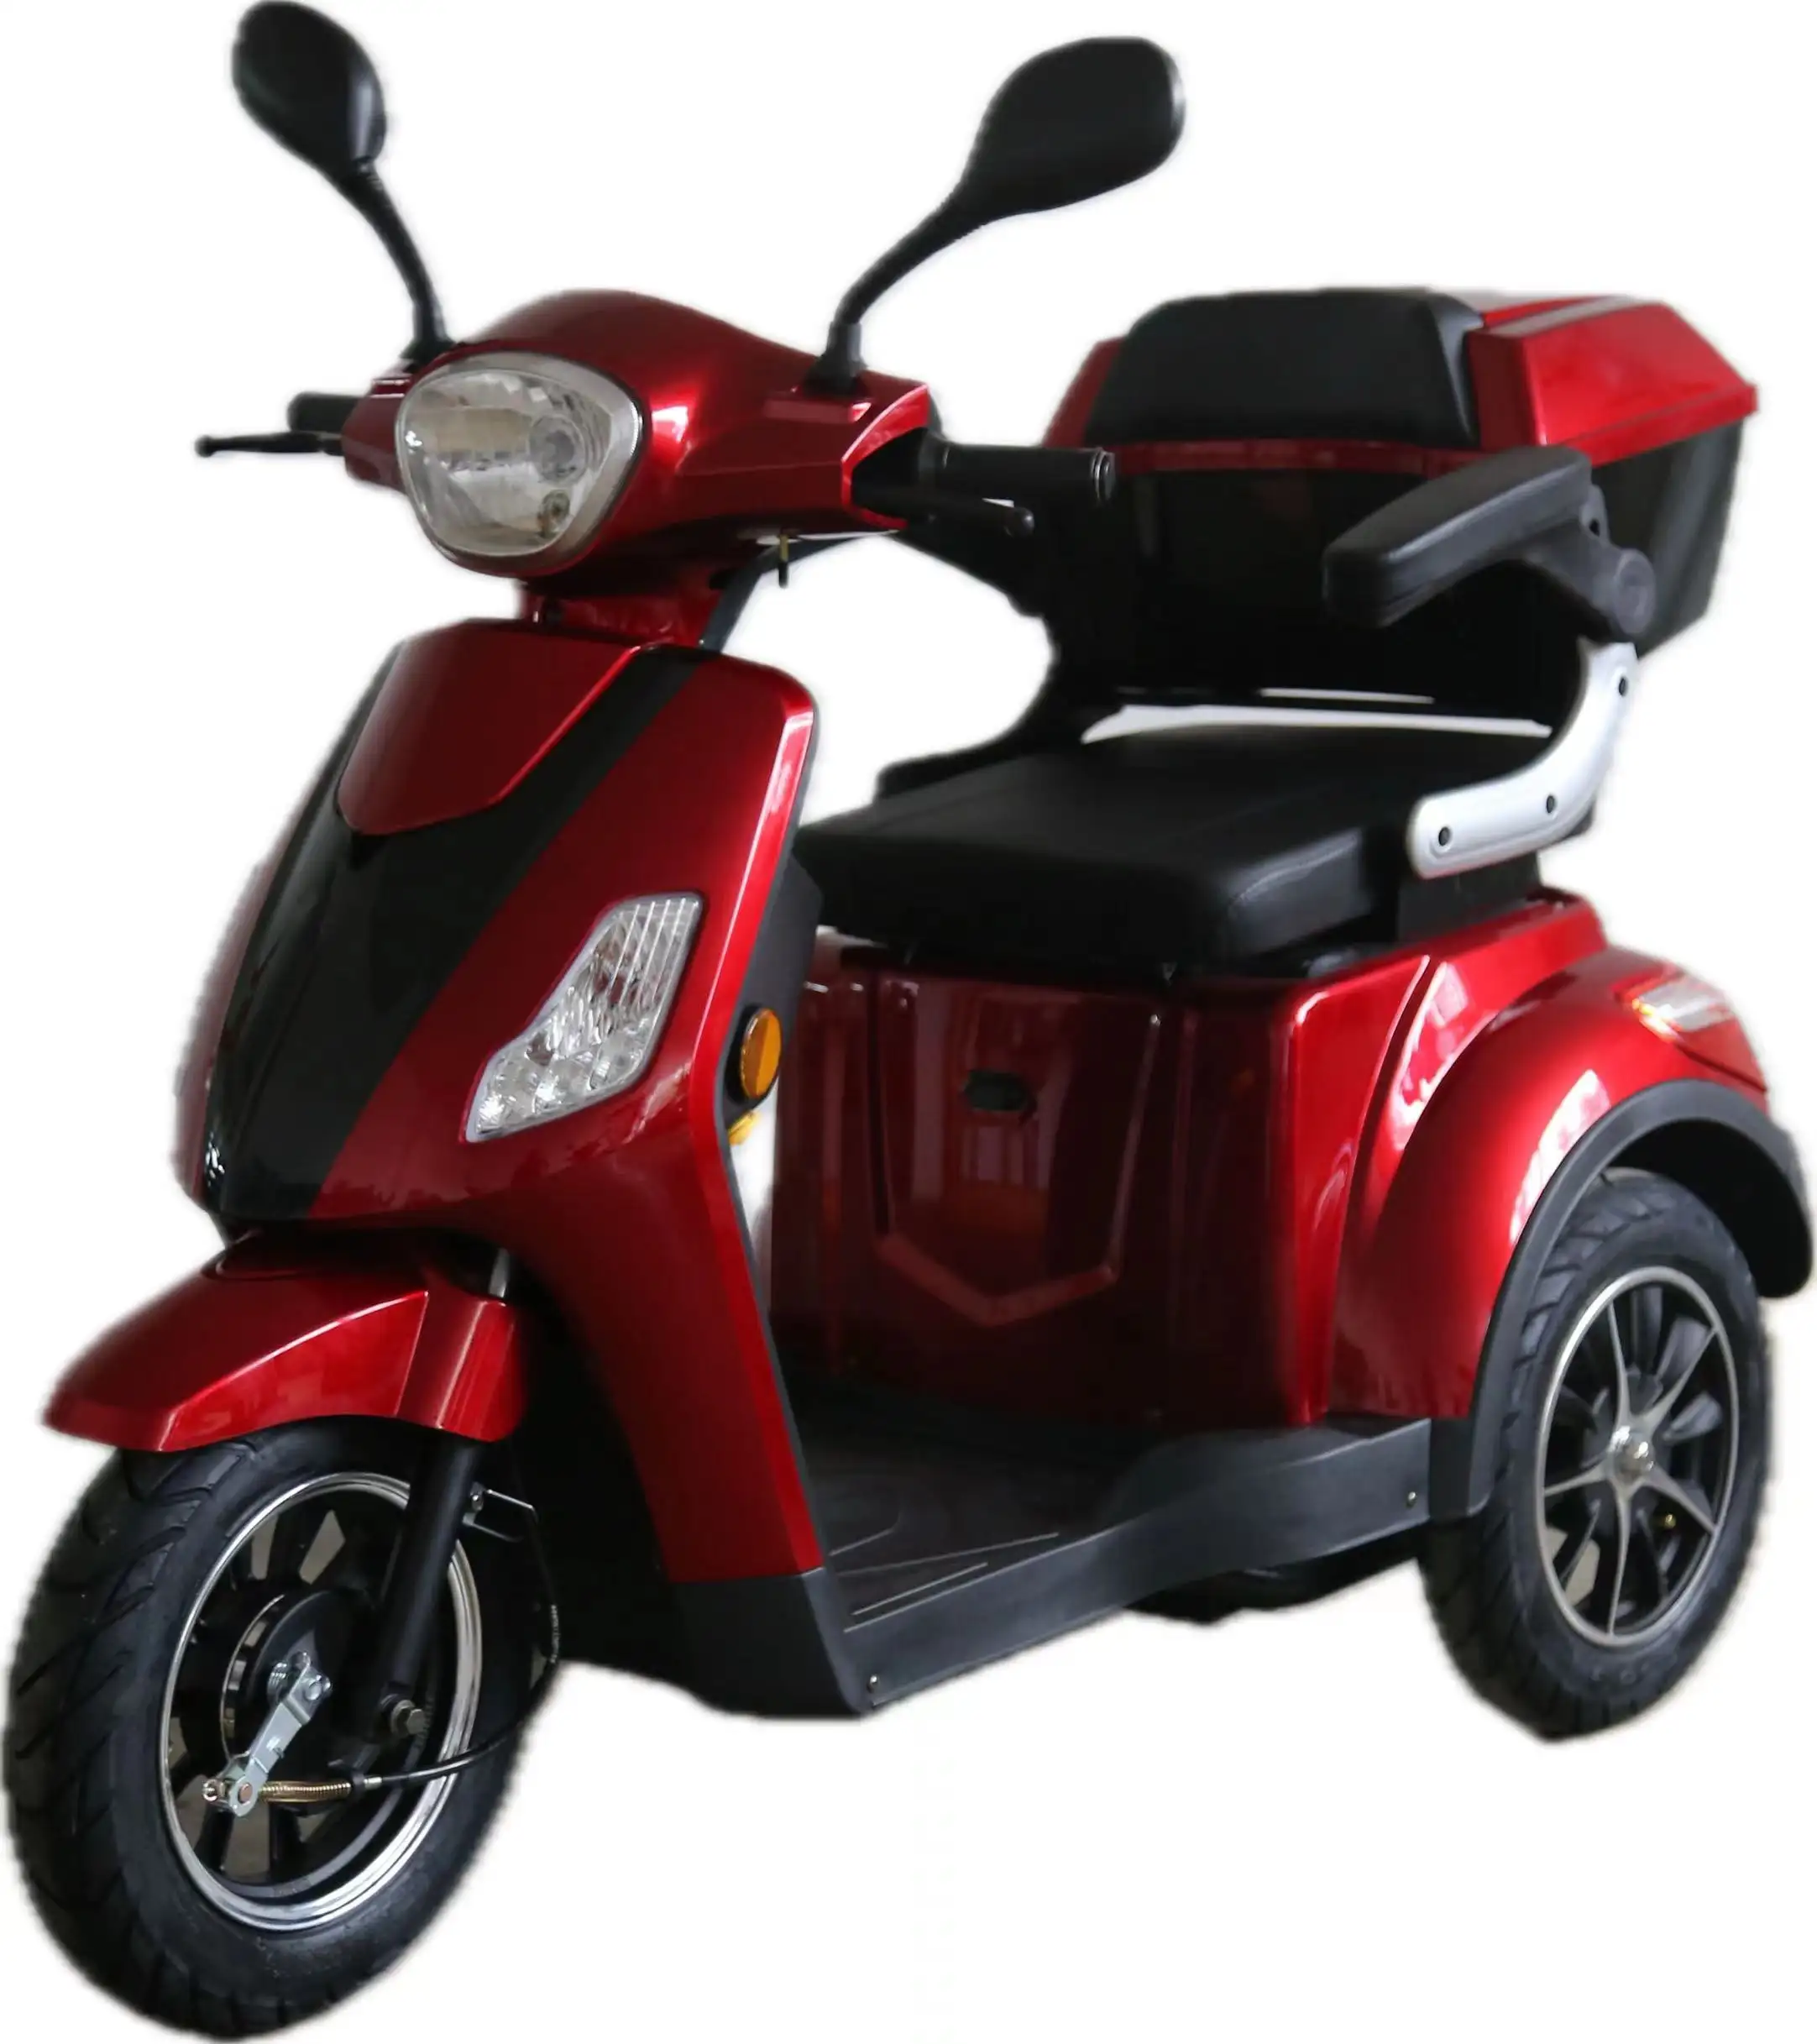 EEC 3wheels handicapped electric tricycle for adults